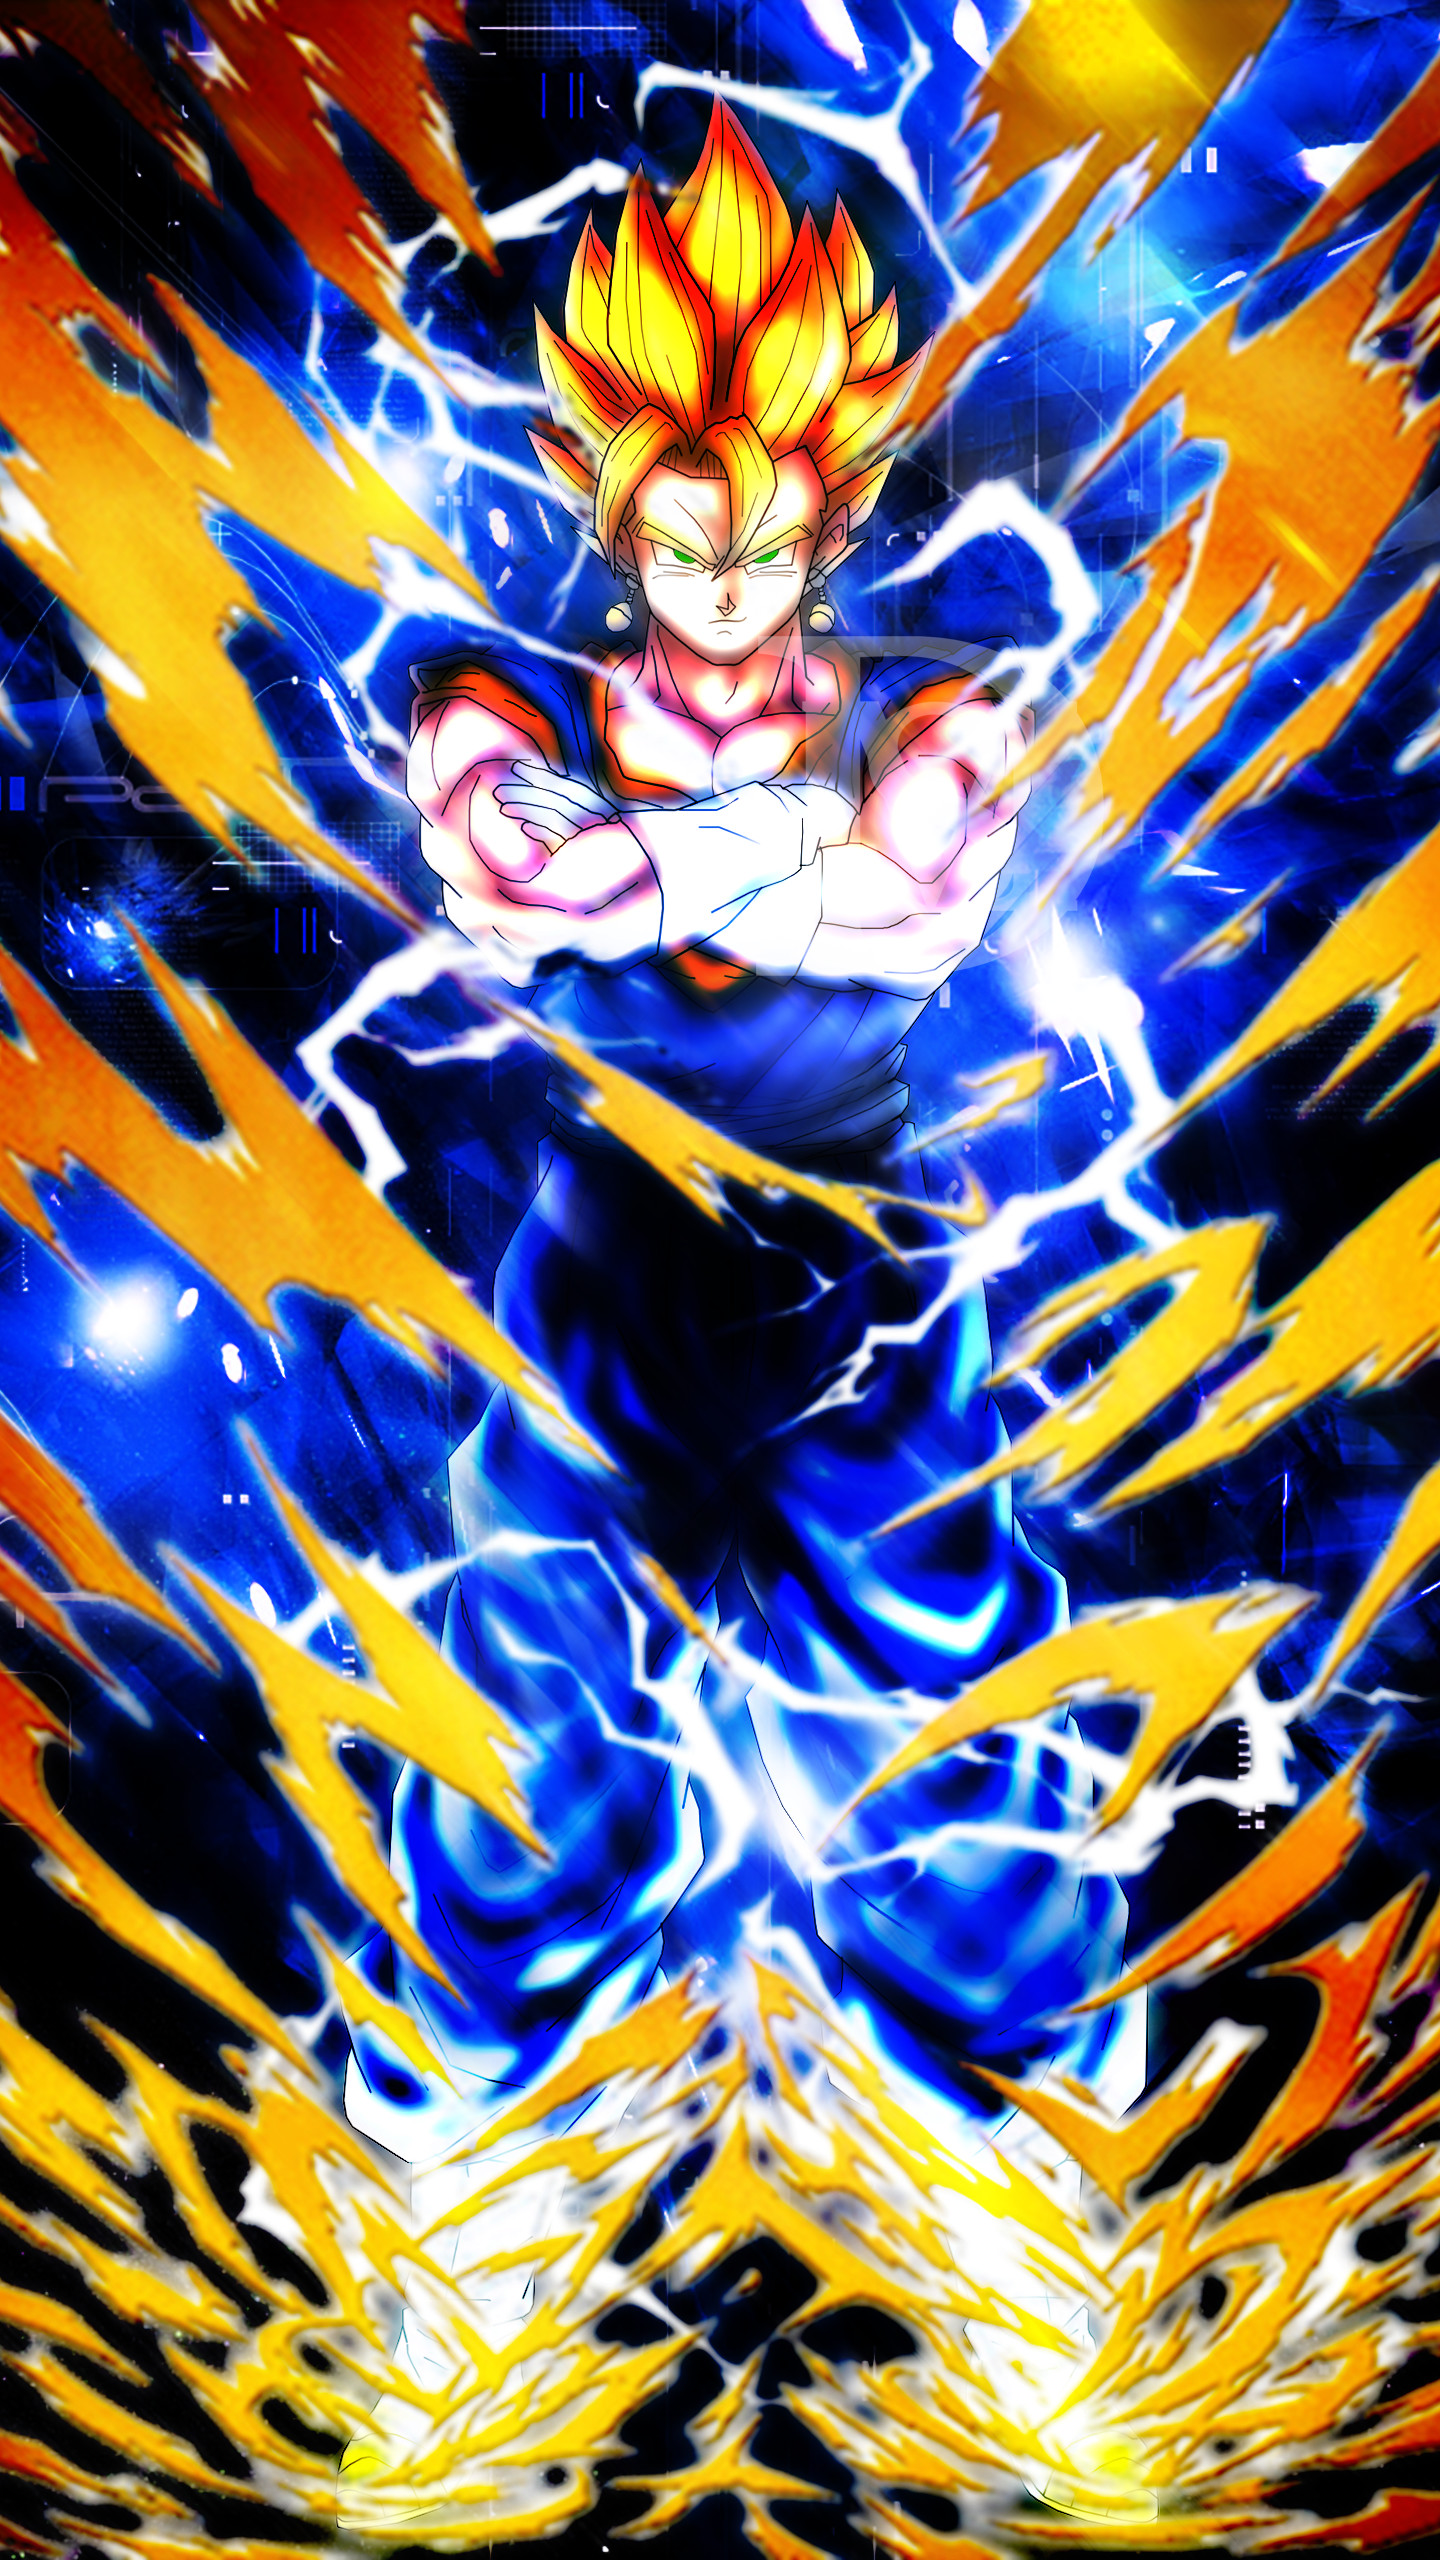 Made a quick edit of ULTRA Super Vegito as a desktop and mobile wallpaper  Feel free to use   rDragonballLegends